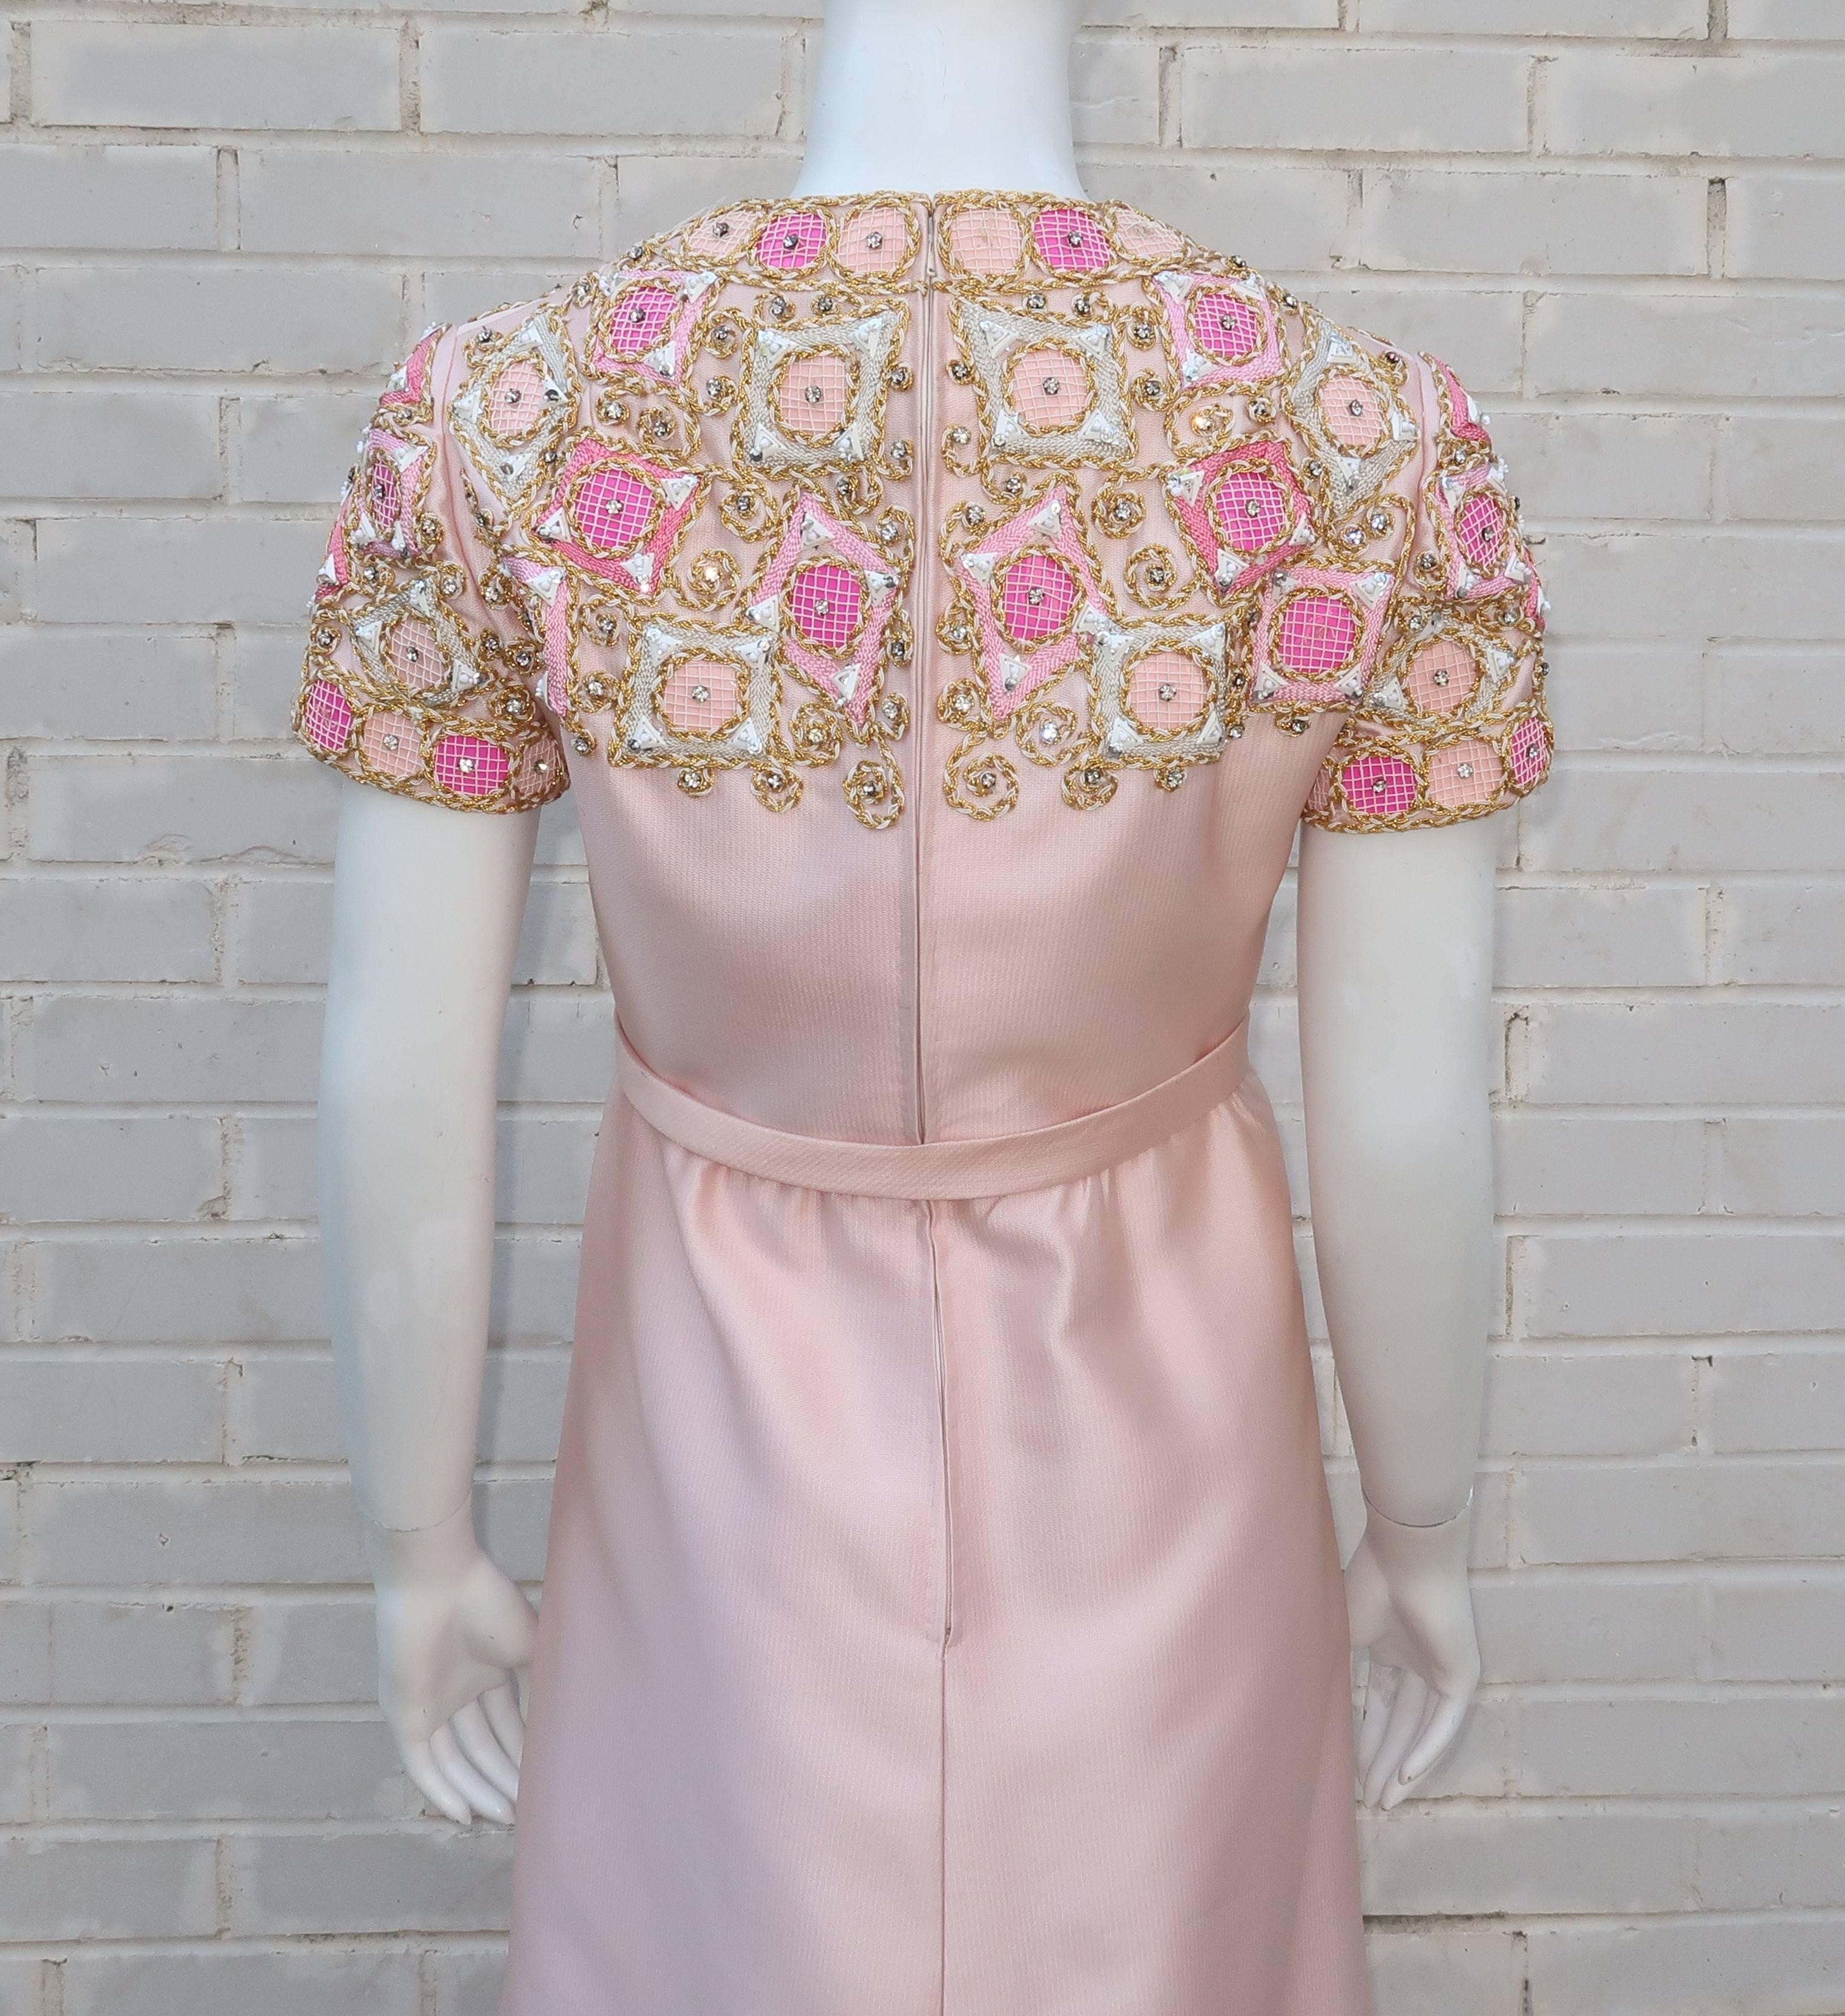 1960’s Malcolm Starr Pink Beaded Evening Dress With Rhinestones 6